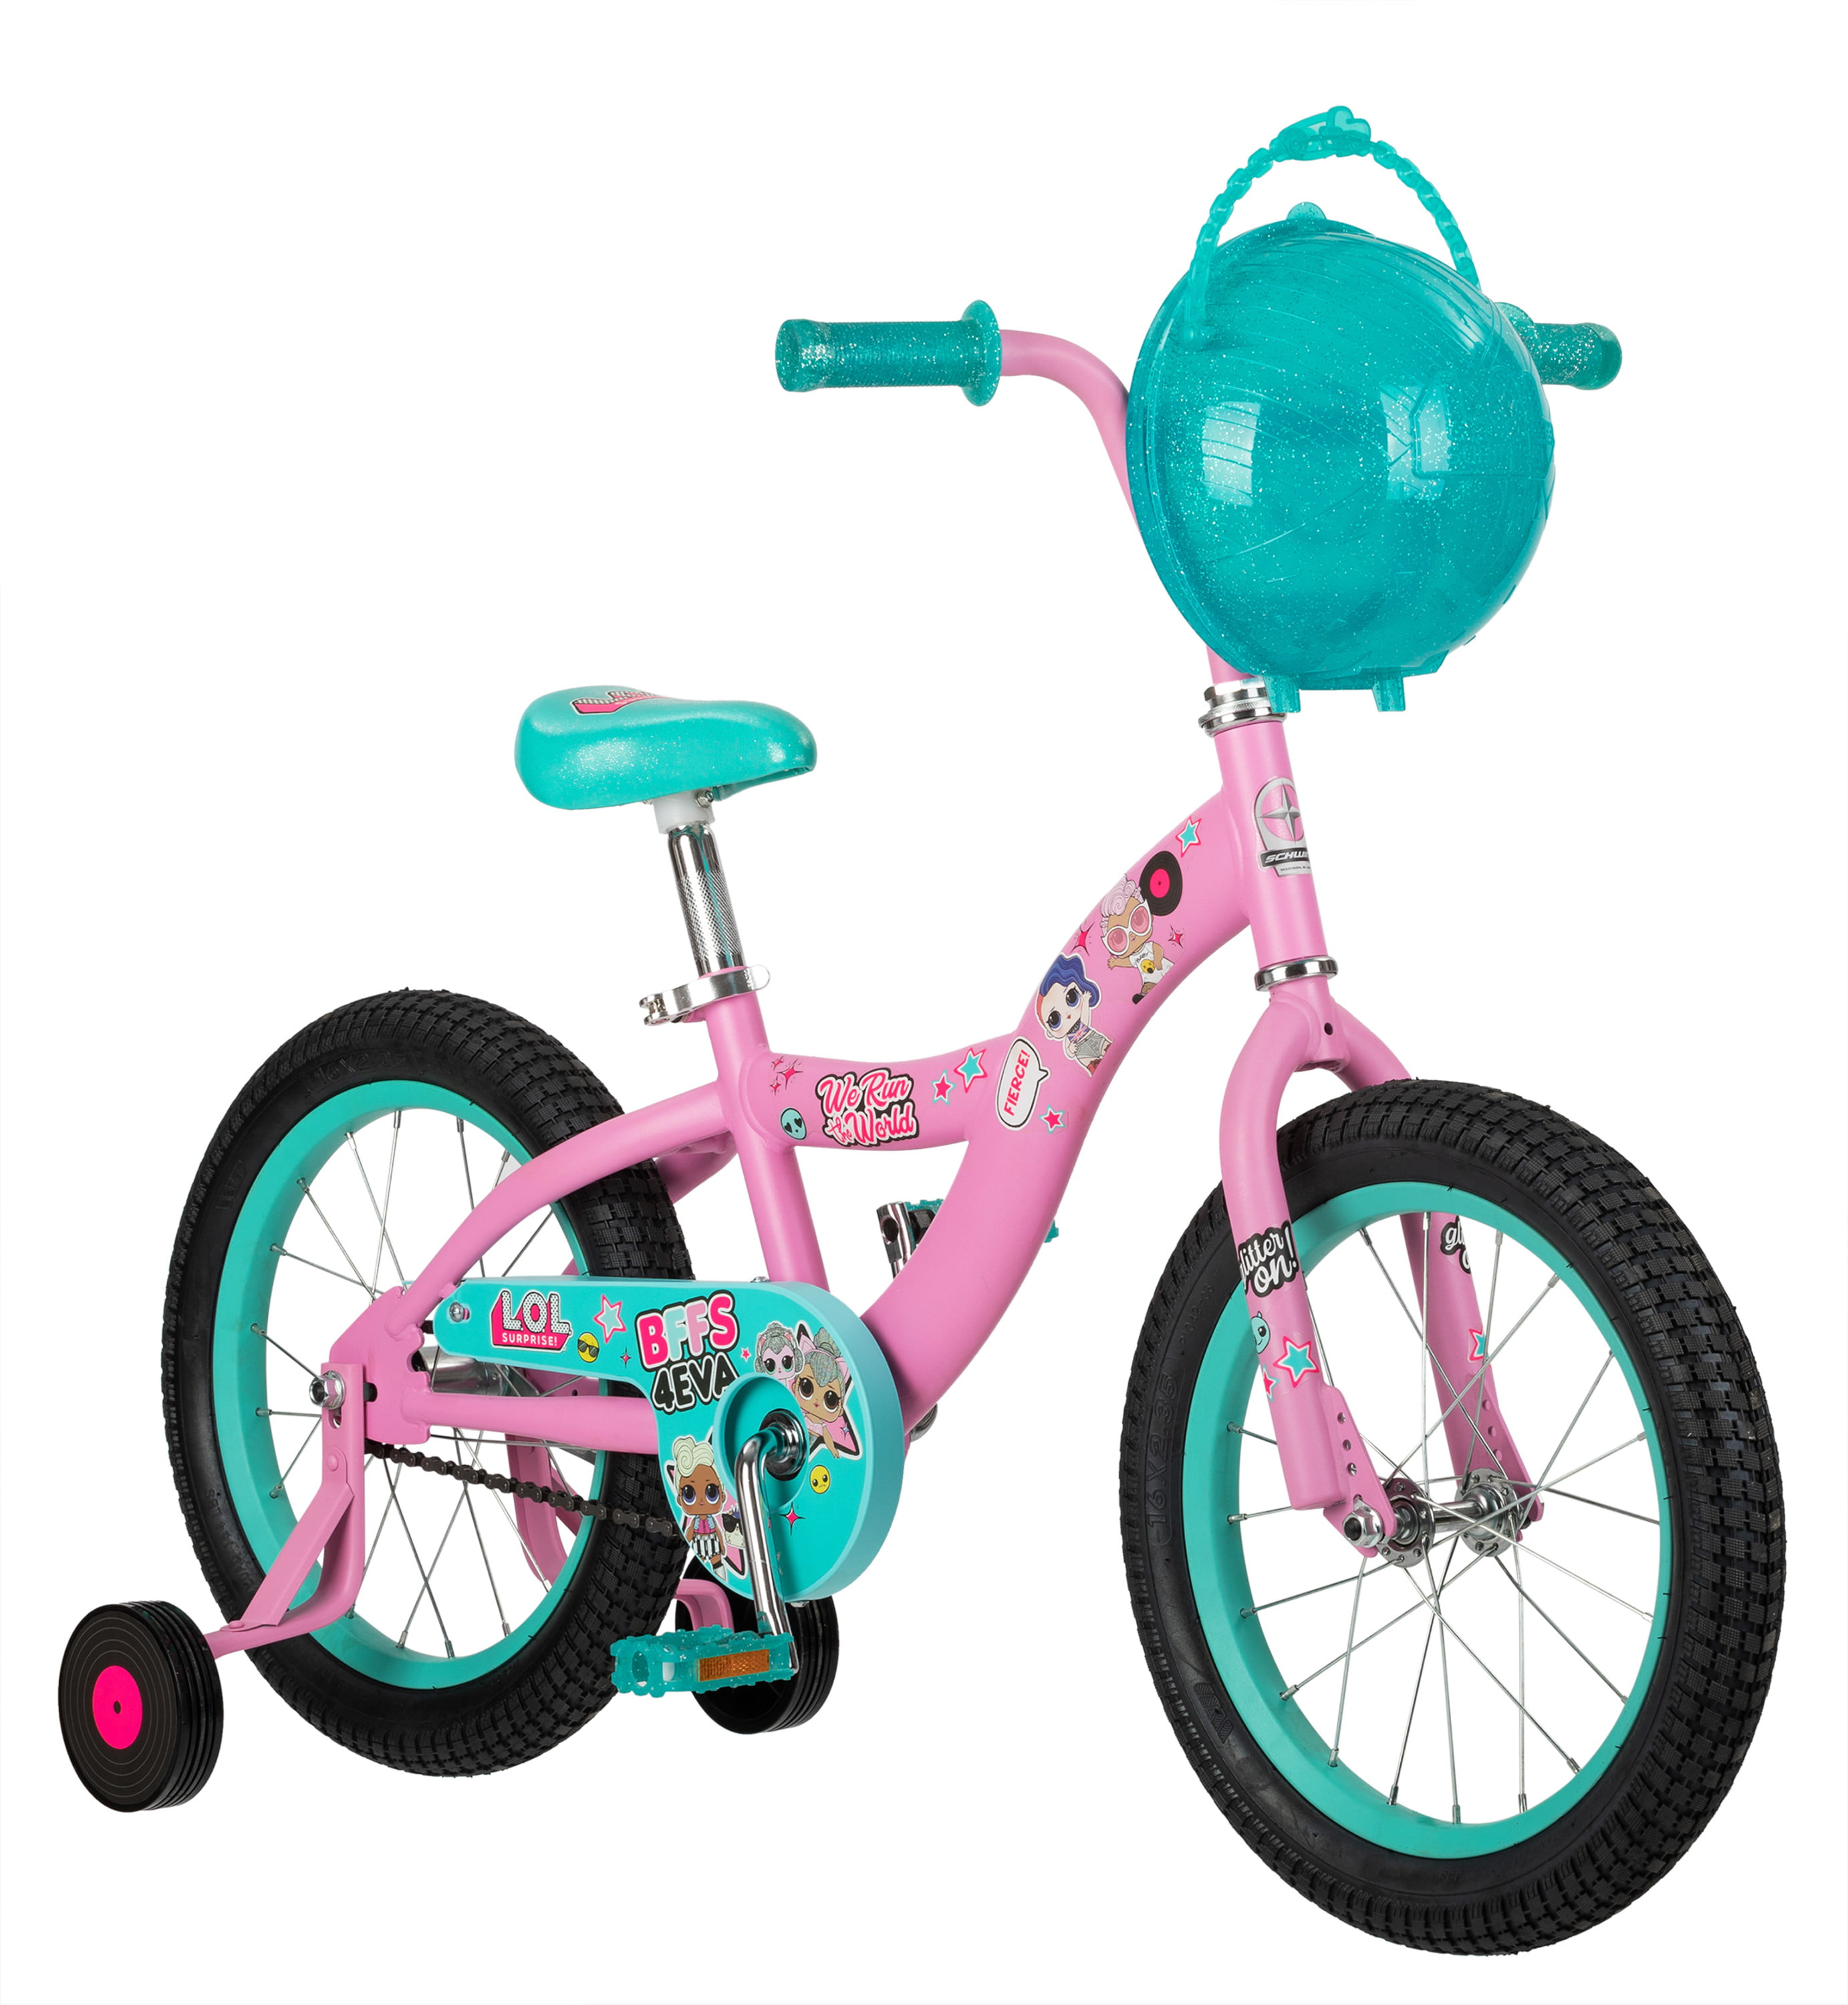 NEW 16"BICYCLE TRAINING WHEELS KIDS BIKES COMPLETE